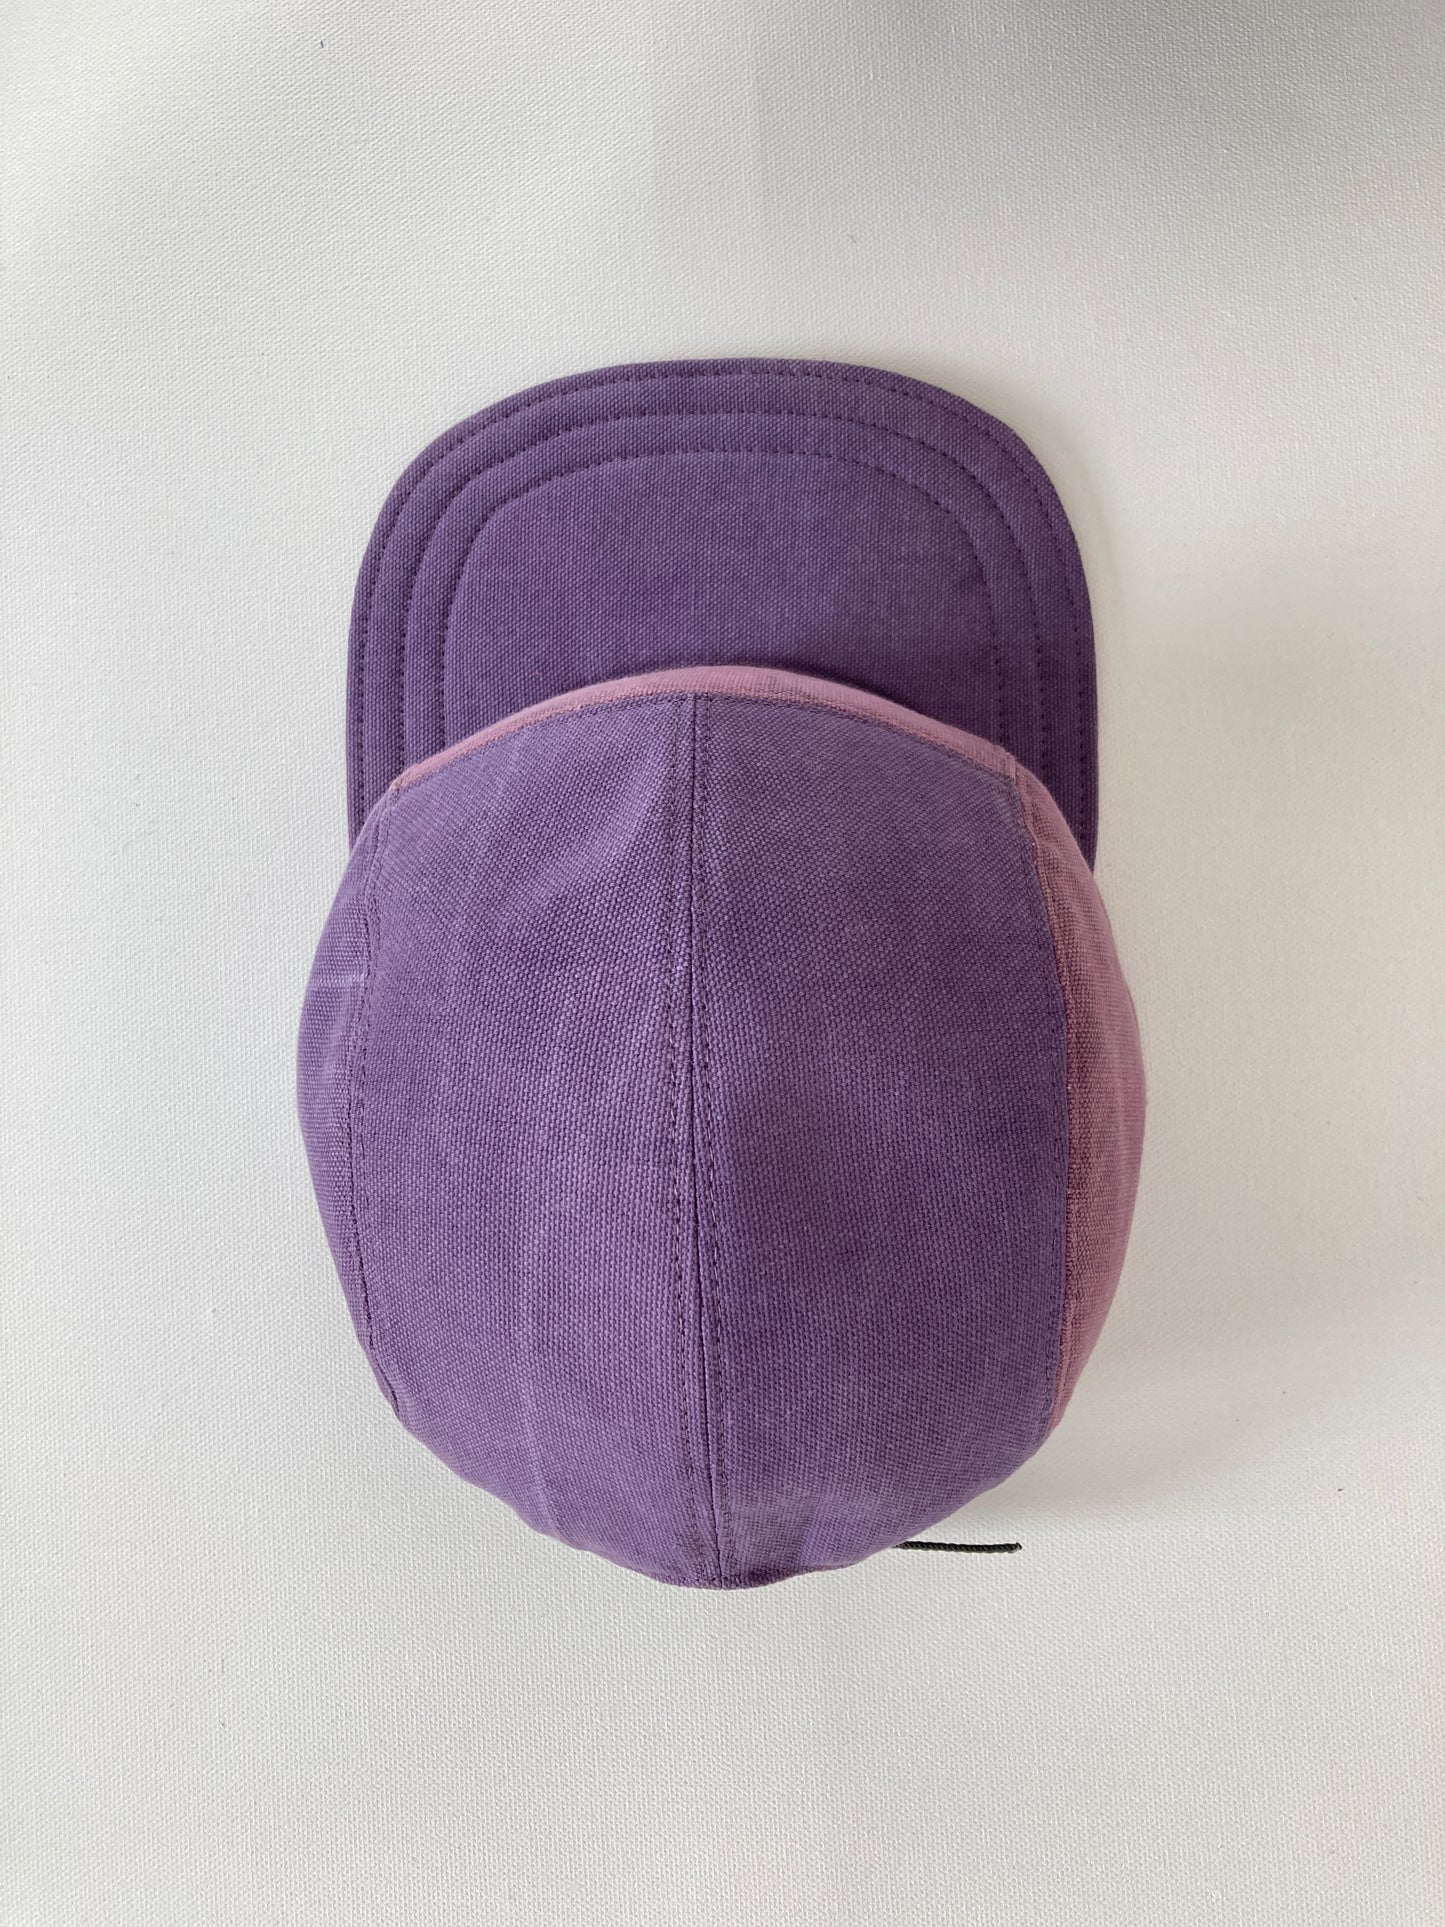 Naturally Dyed Camp Hat - Grape Jelly